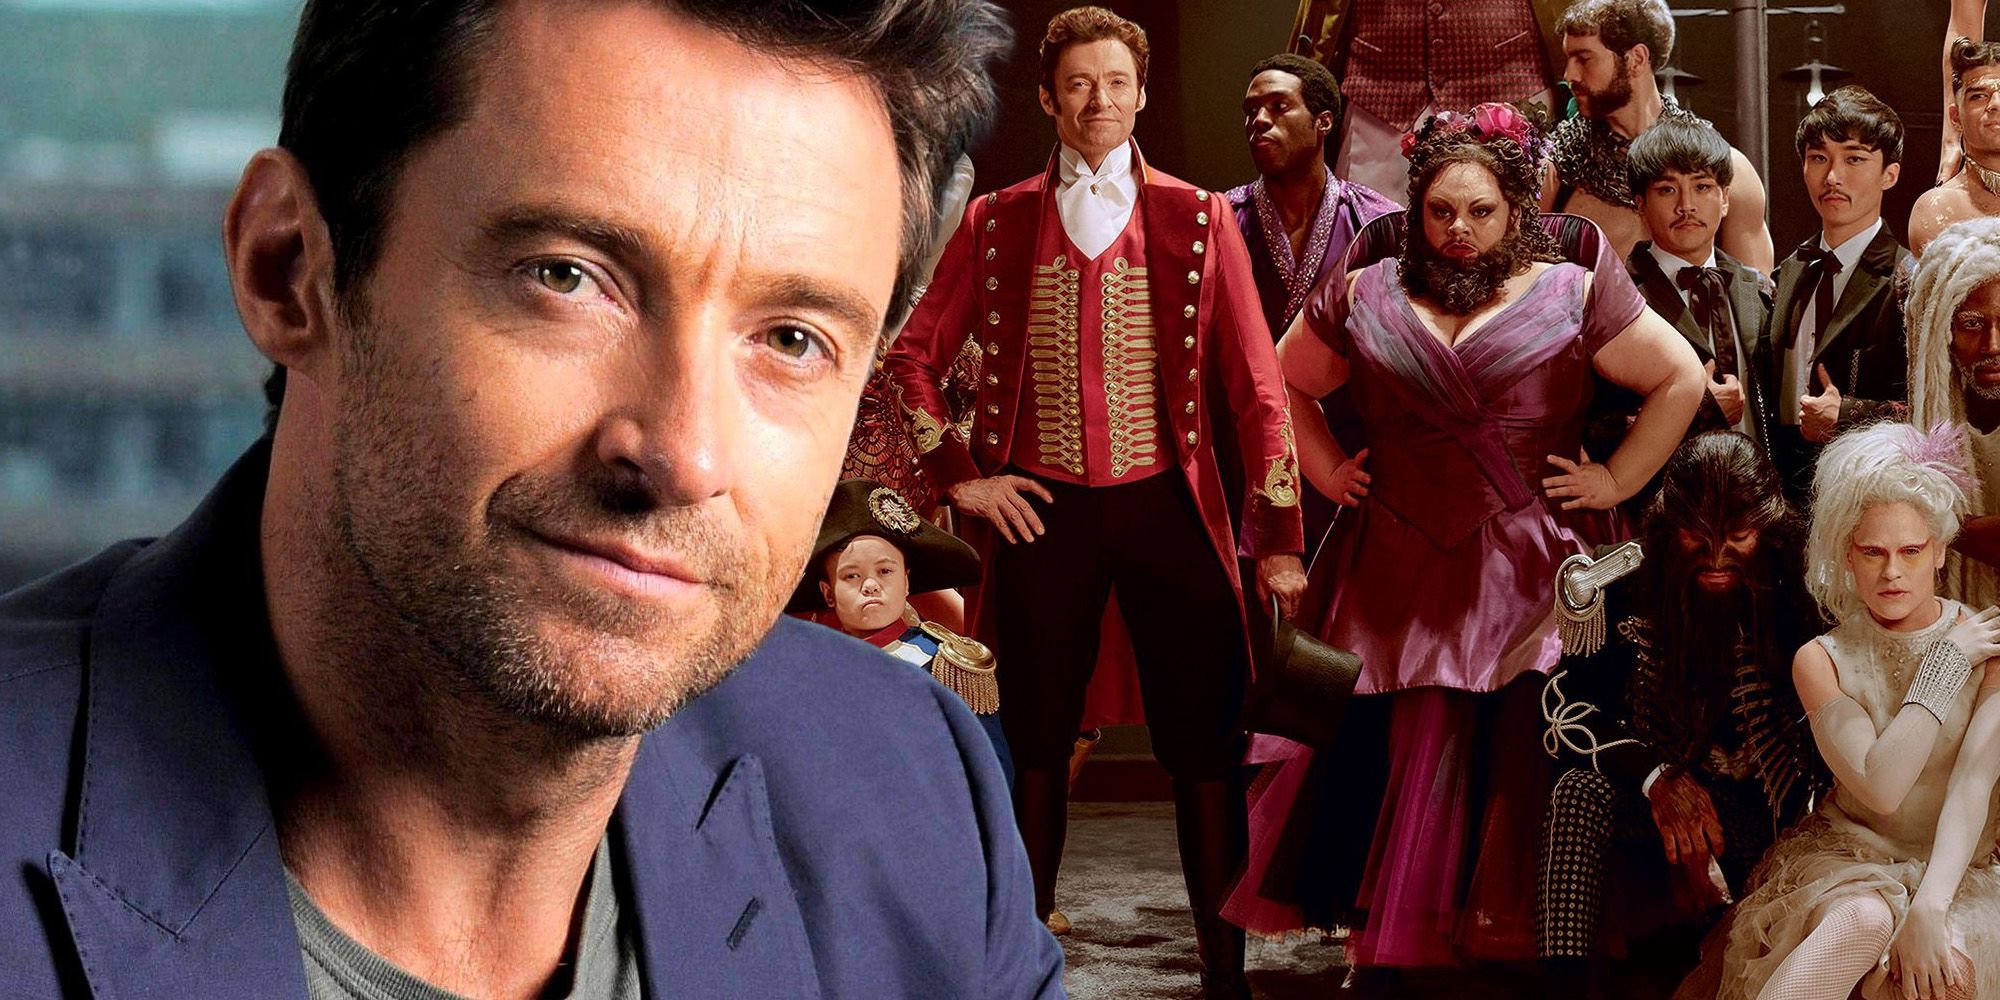 The Greatest Showman What The Cast Looks Like In Real Life